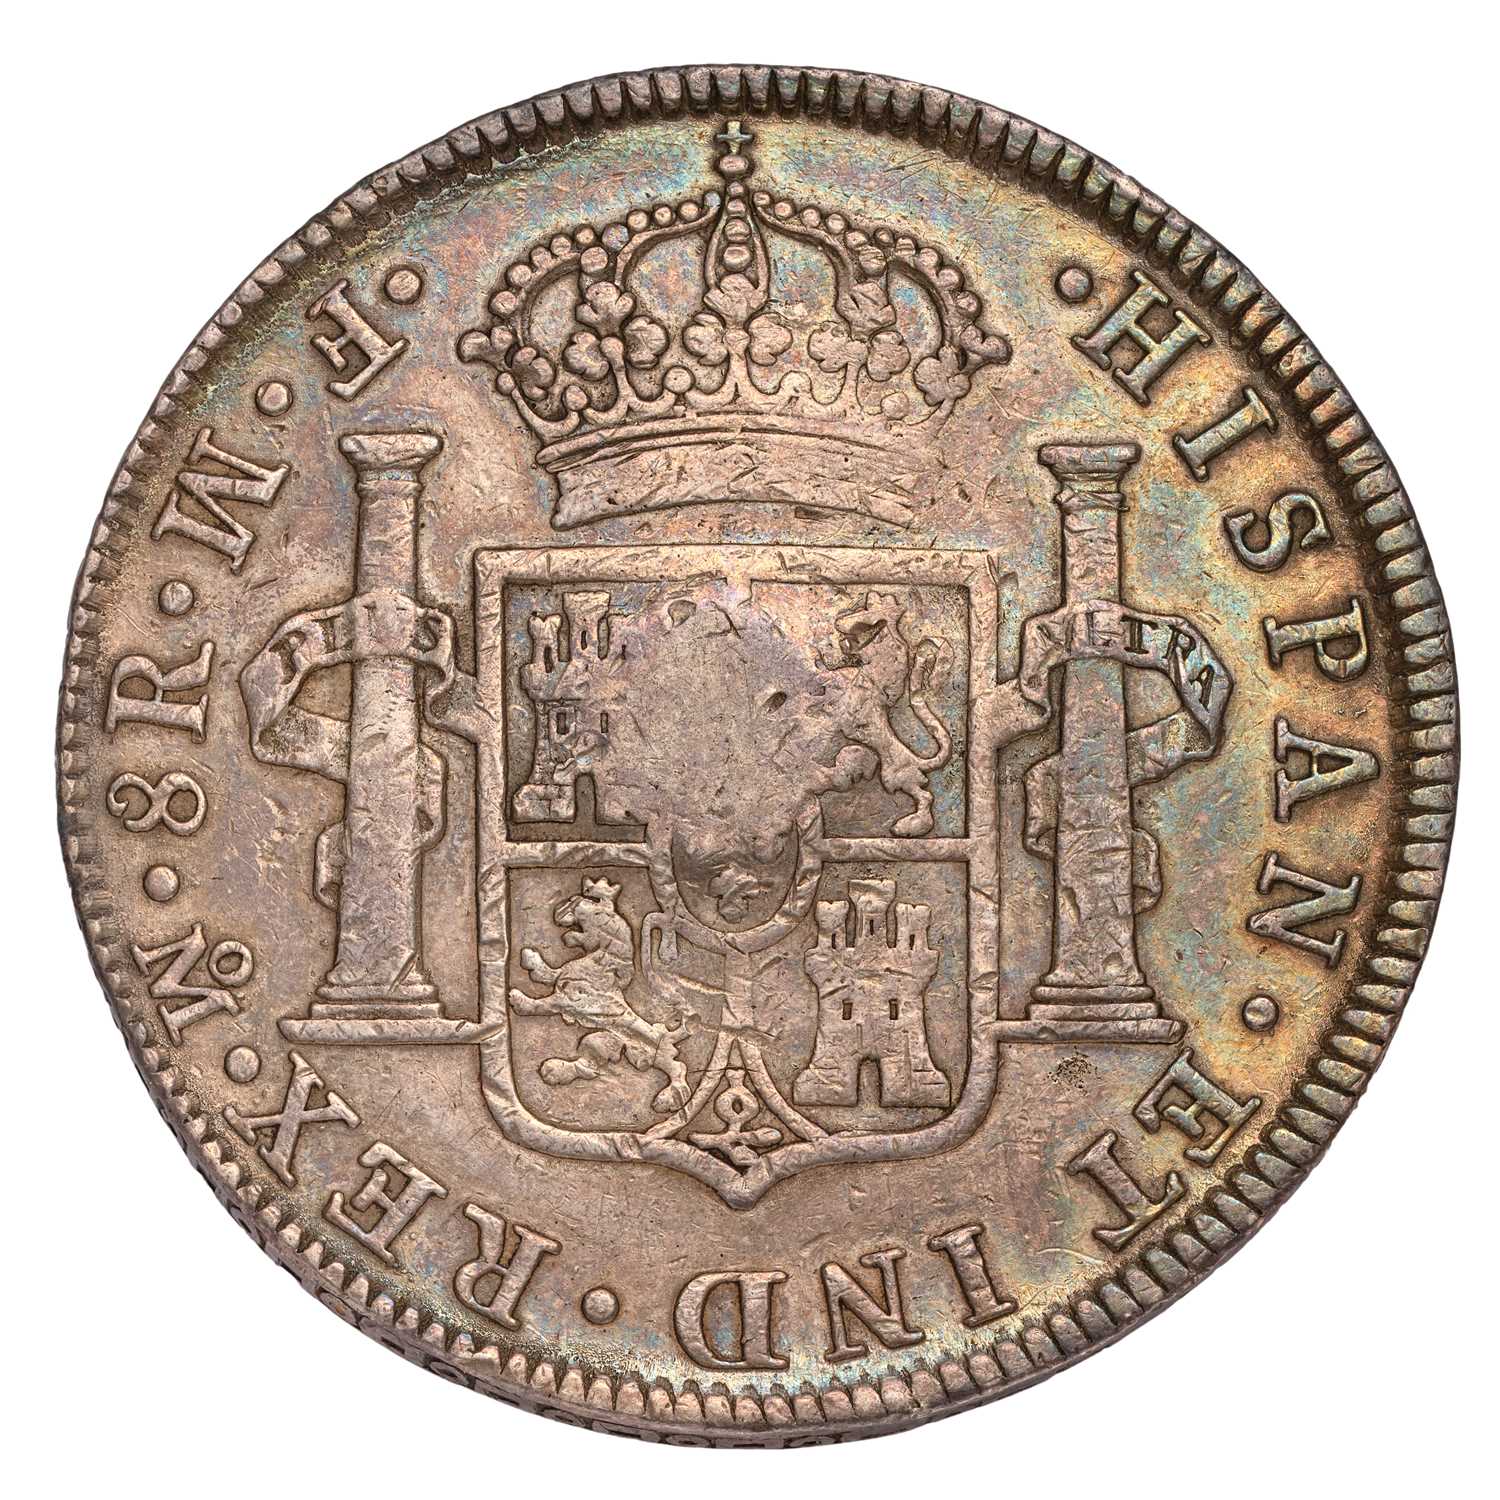 George III, Emergency Issue Dollar, oval countermark, struck on Charles III, 8 reales 1772, Mexico - Image 2 of 2